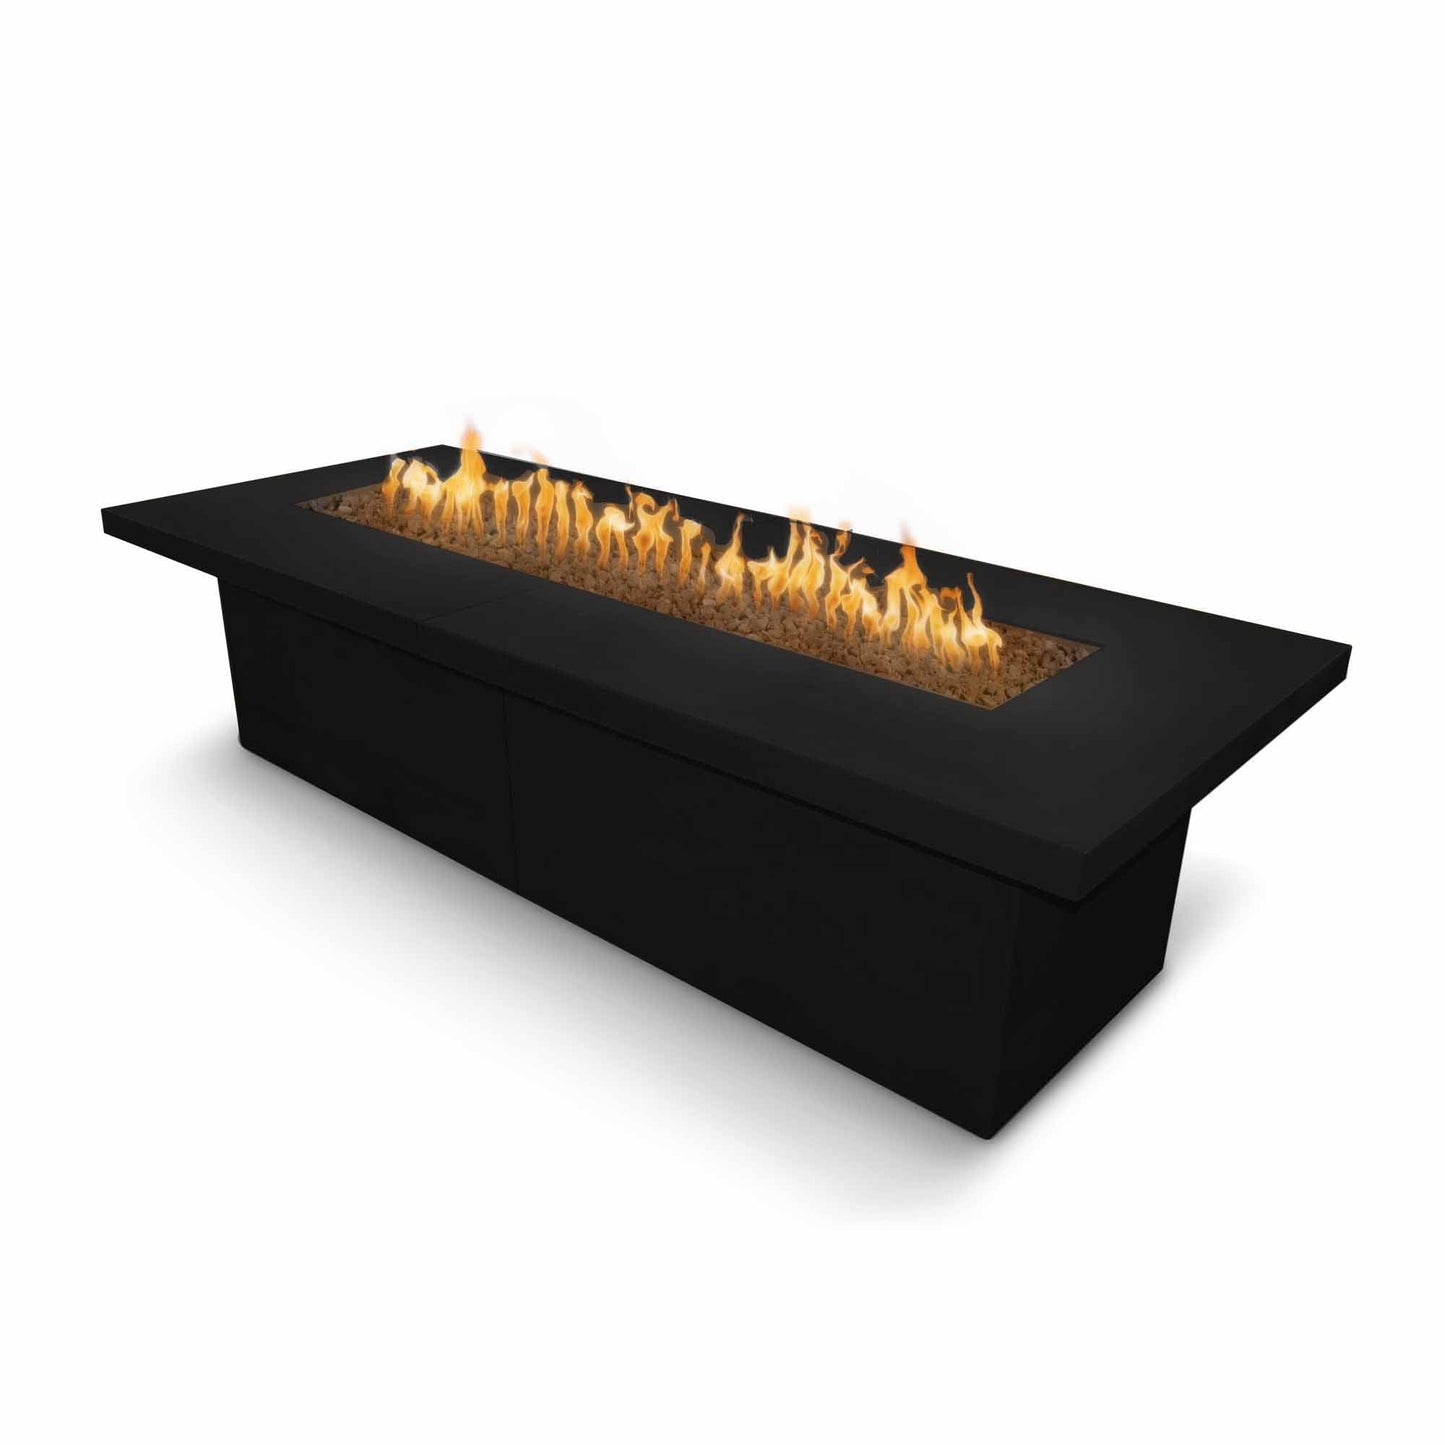 The Outdoor Plus Rectangular Newport 120" Java Powder Coated Metal Liquid Propane Fire Pit with 110V Electronic Ignition